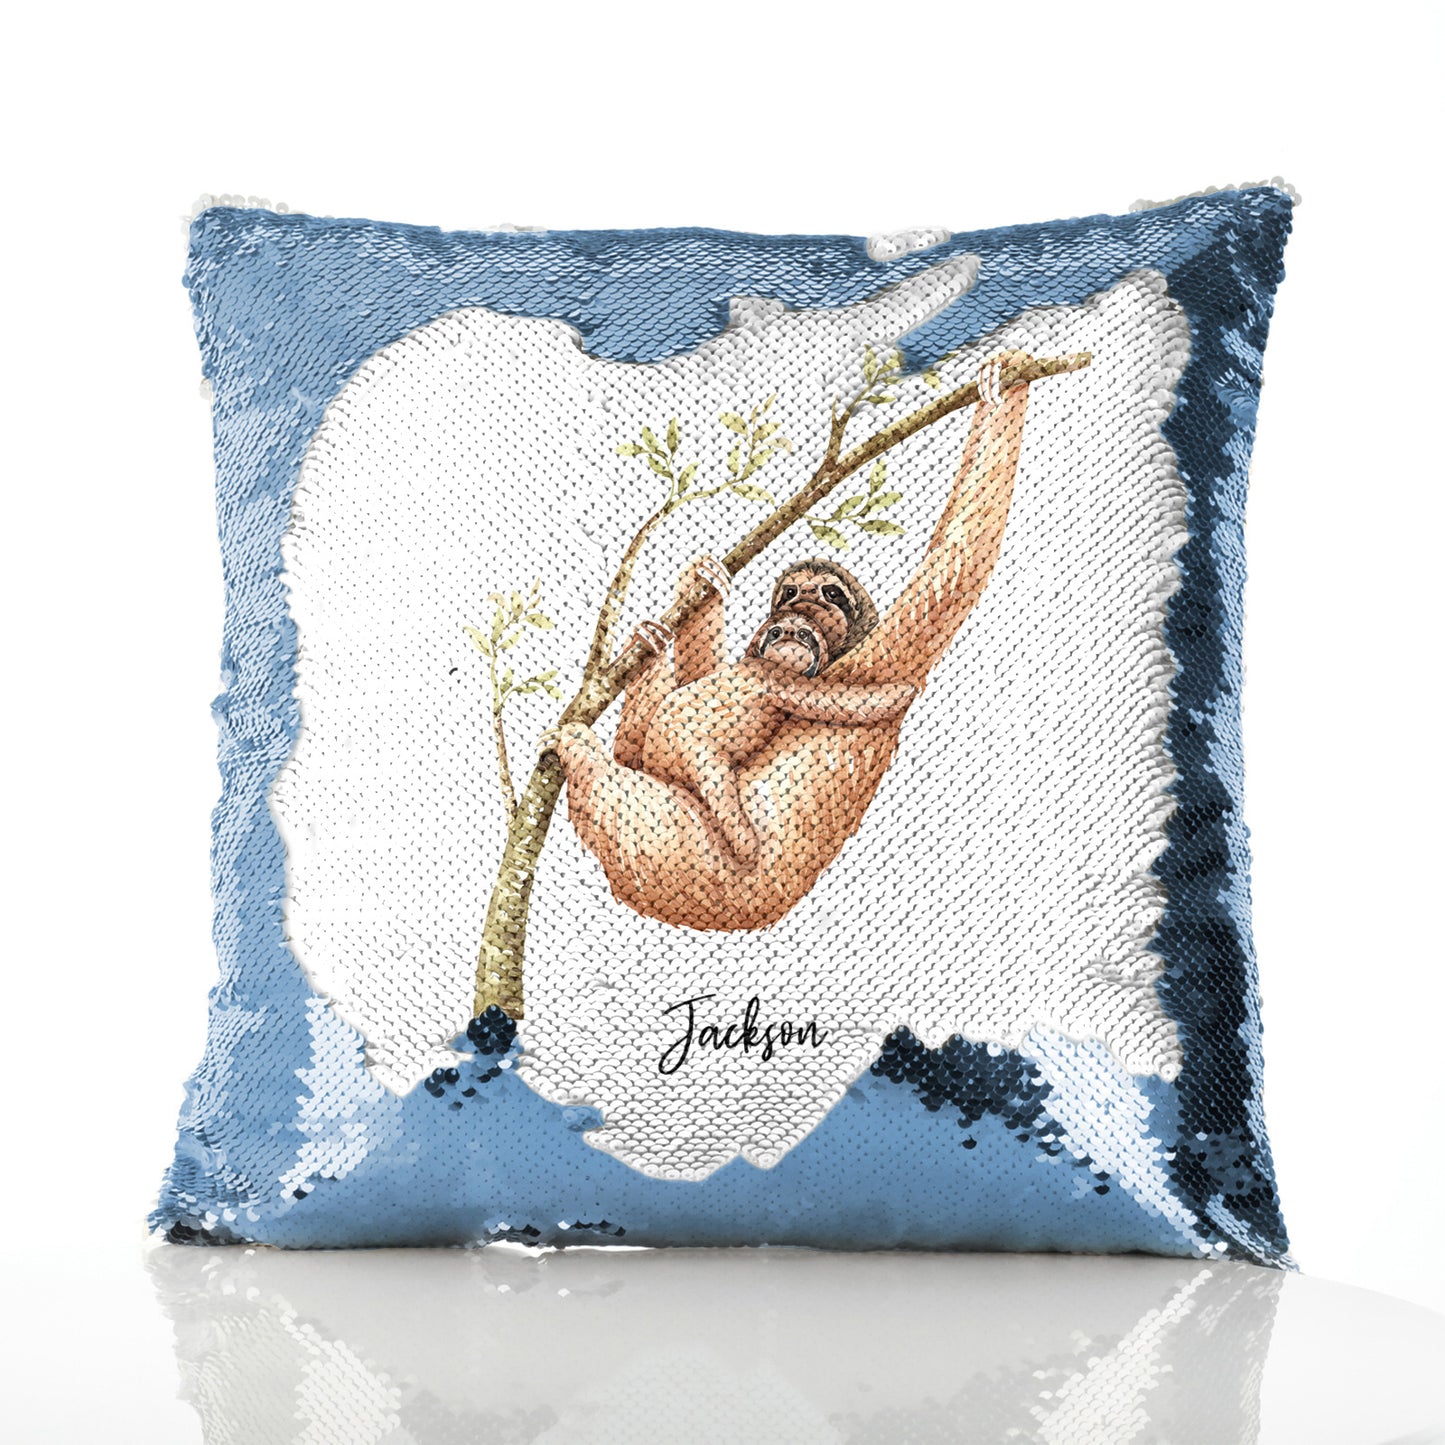 Personalised Sequin Cushion with Welcoming Text and Climbing Mum and Baby Sloths